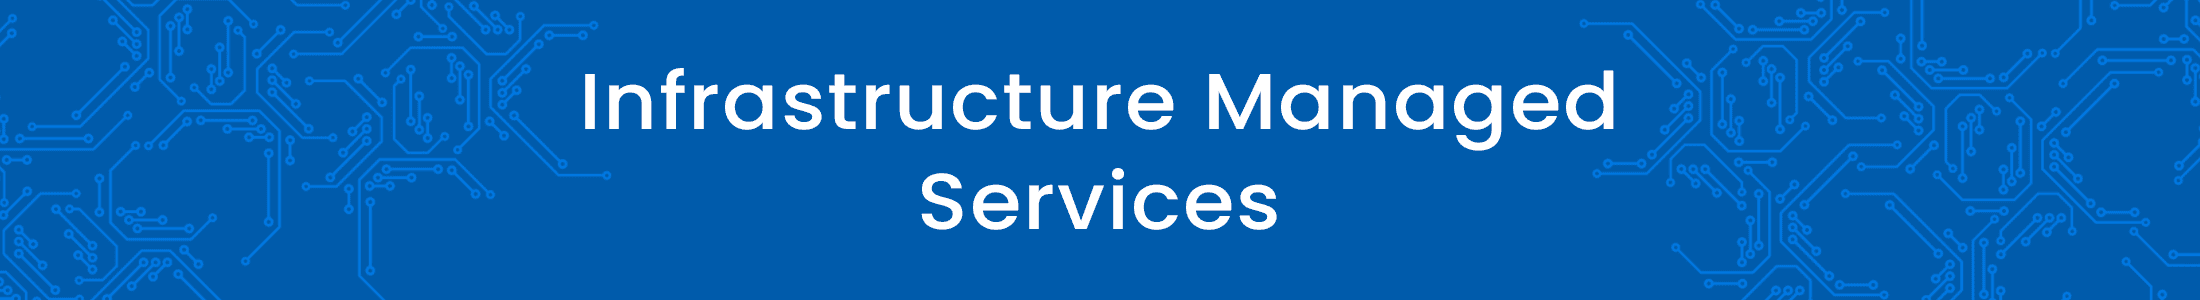 Infrastructure Managed Services Banner